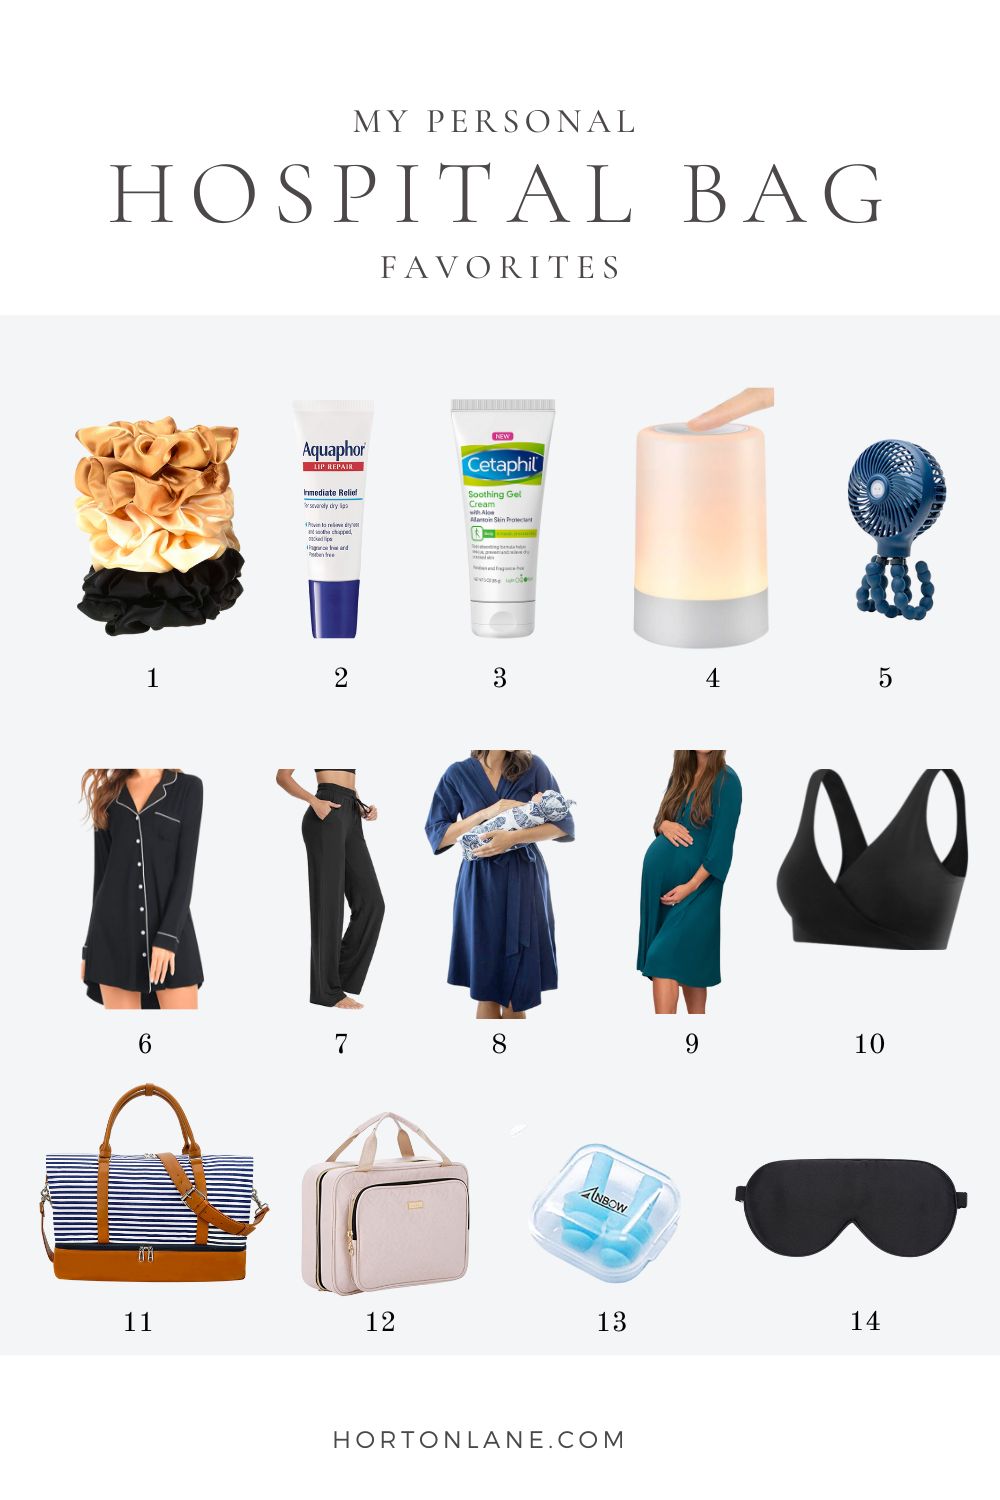 Collage Hospital Bag Checklist Labor and Delivery Personal Favorites